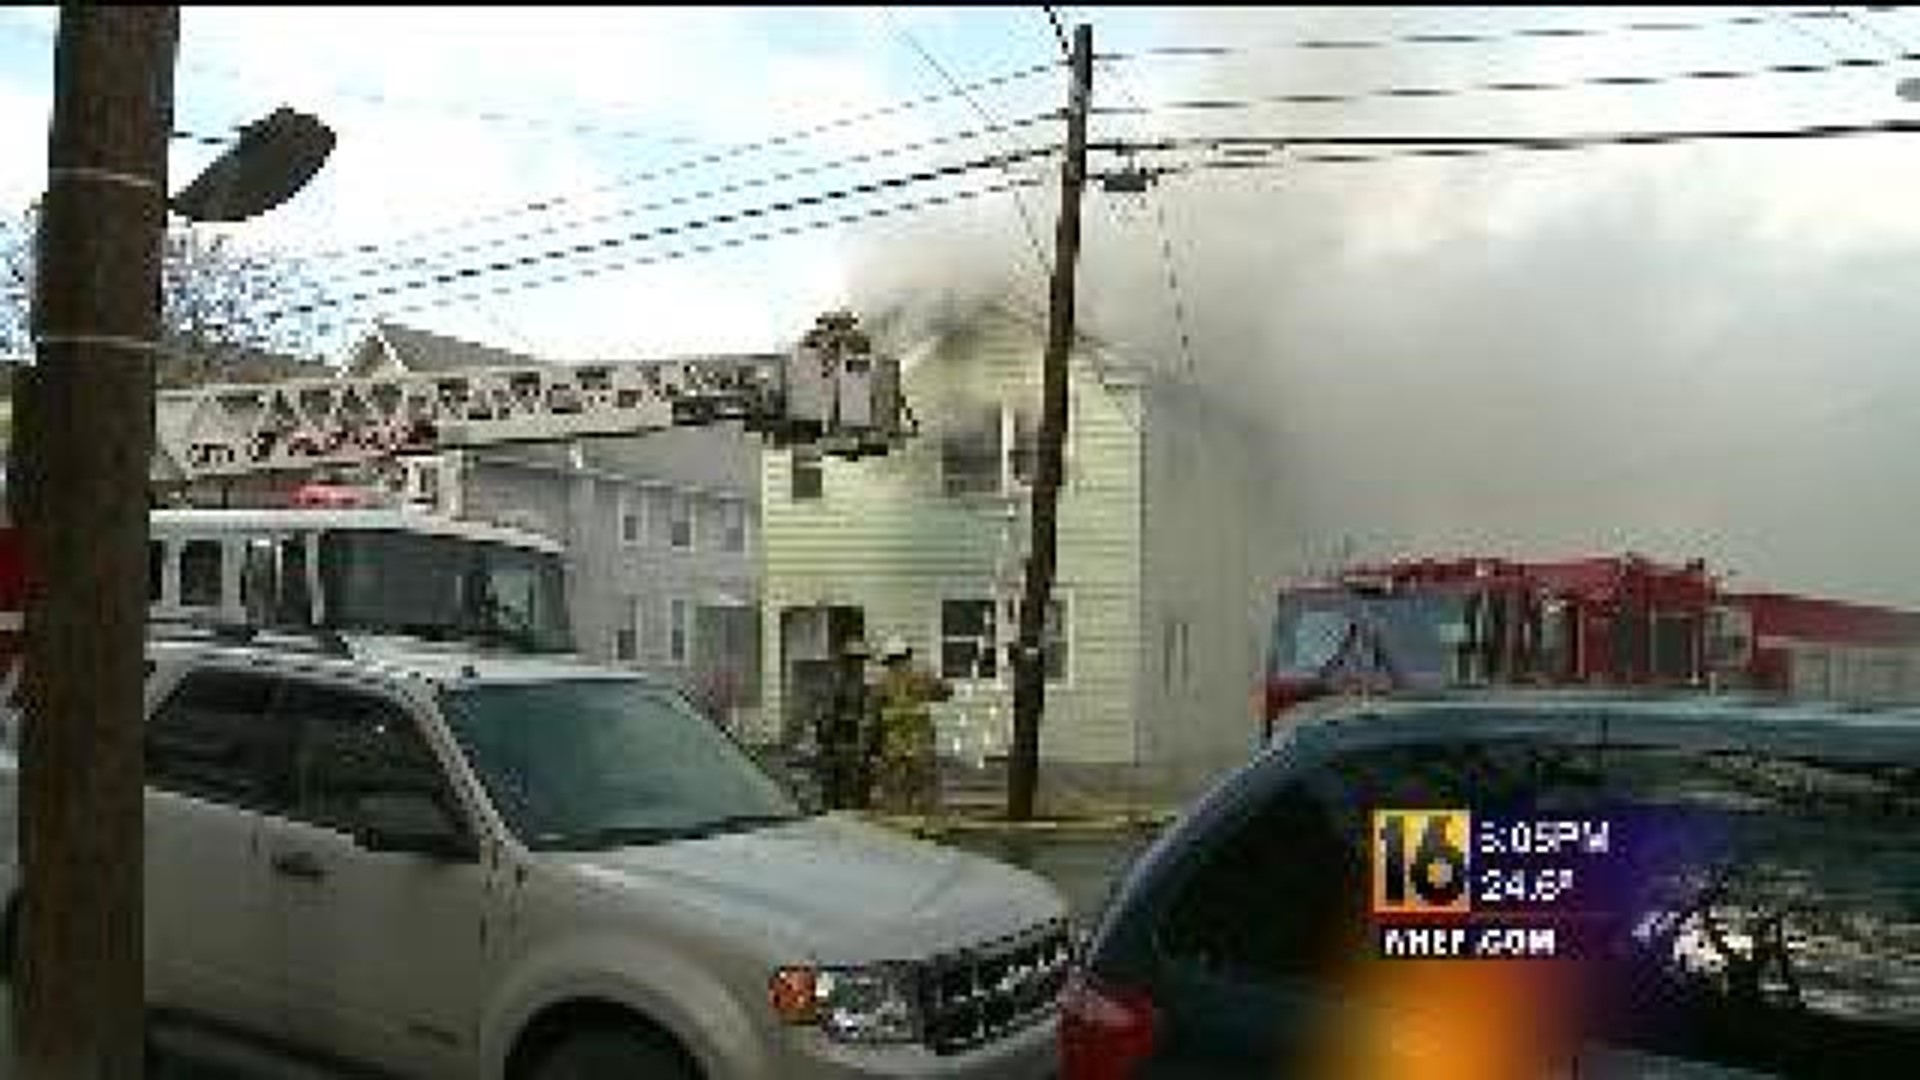 Wilkes-Barre Apartment Building Fire